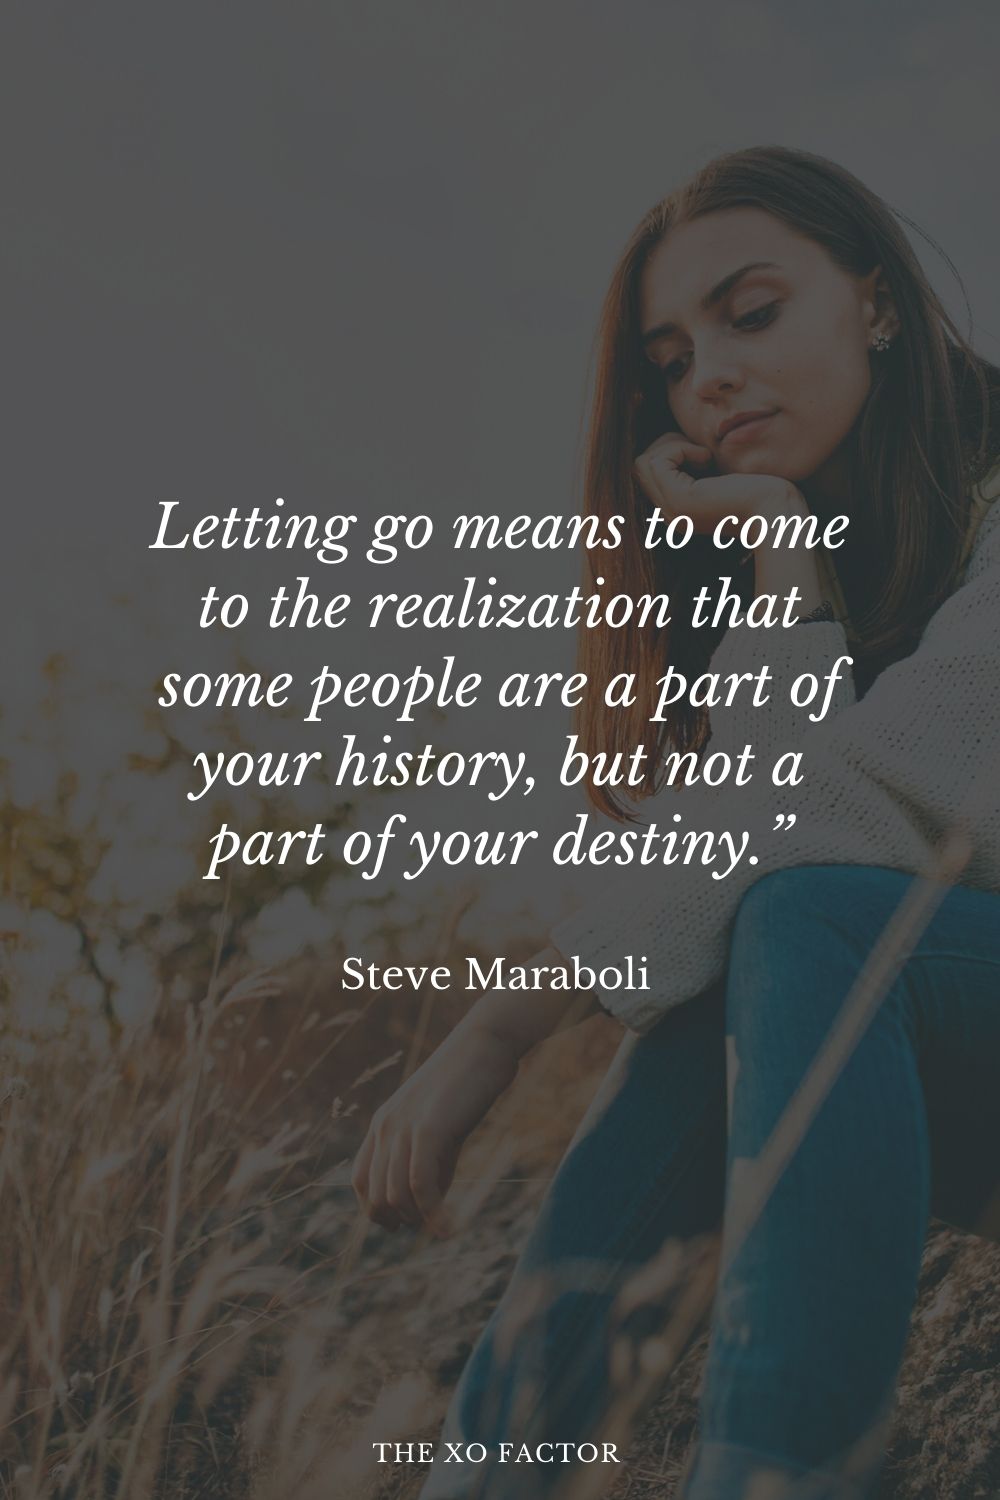 Letting go means to come to the realization that some people are a part of your history, but not a part of your destiny.” Steve Maraboli